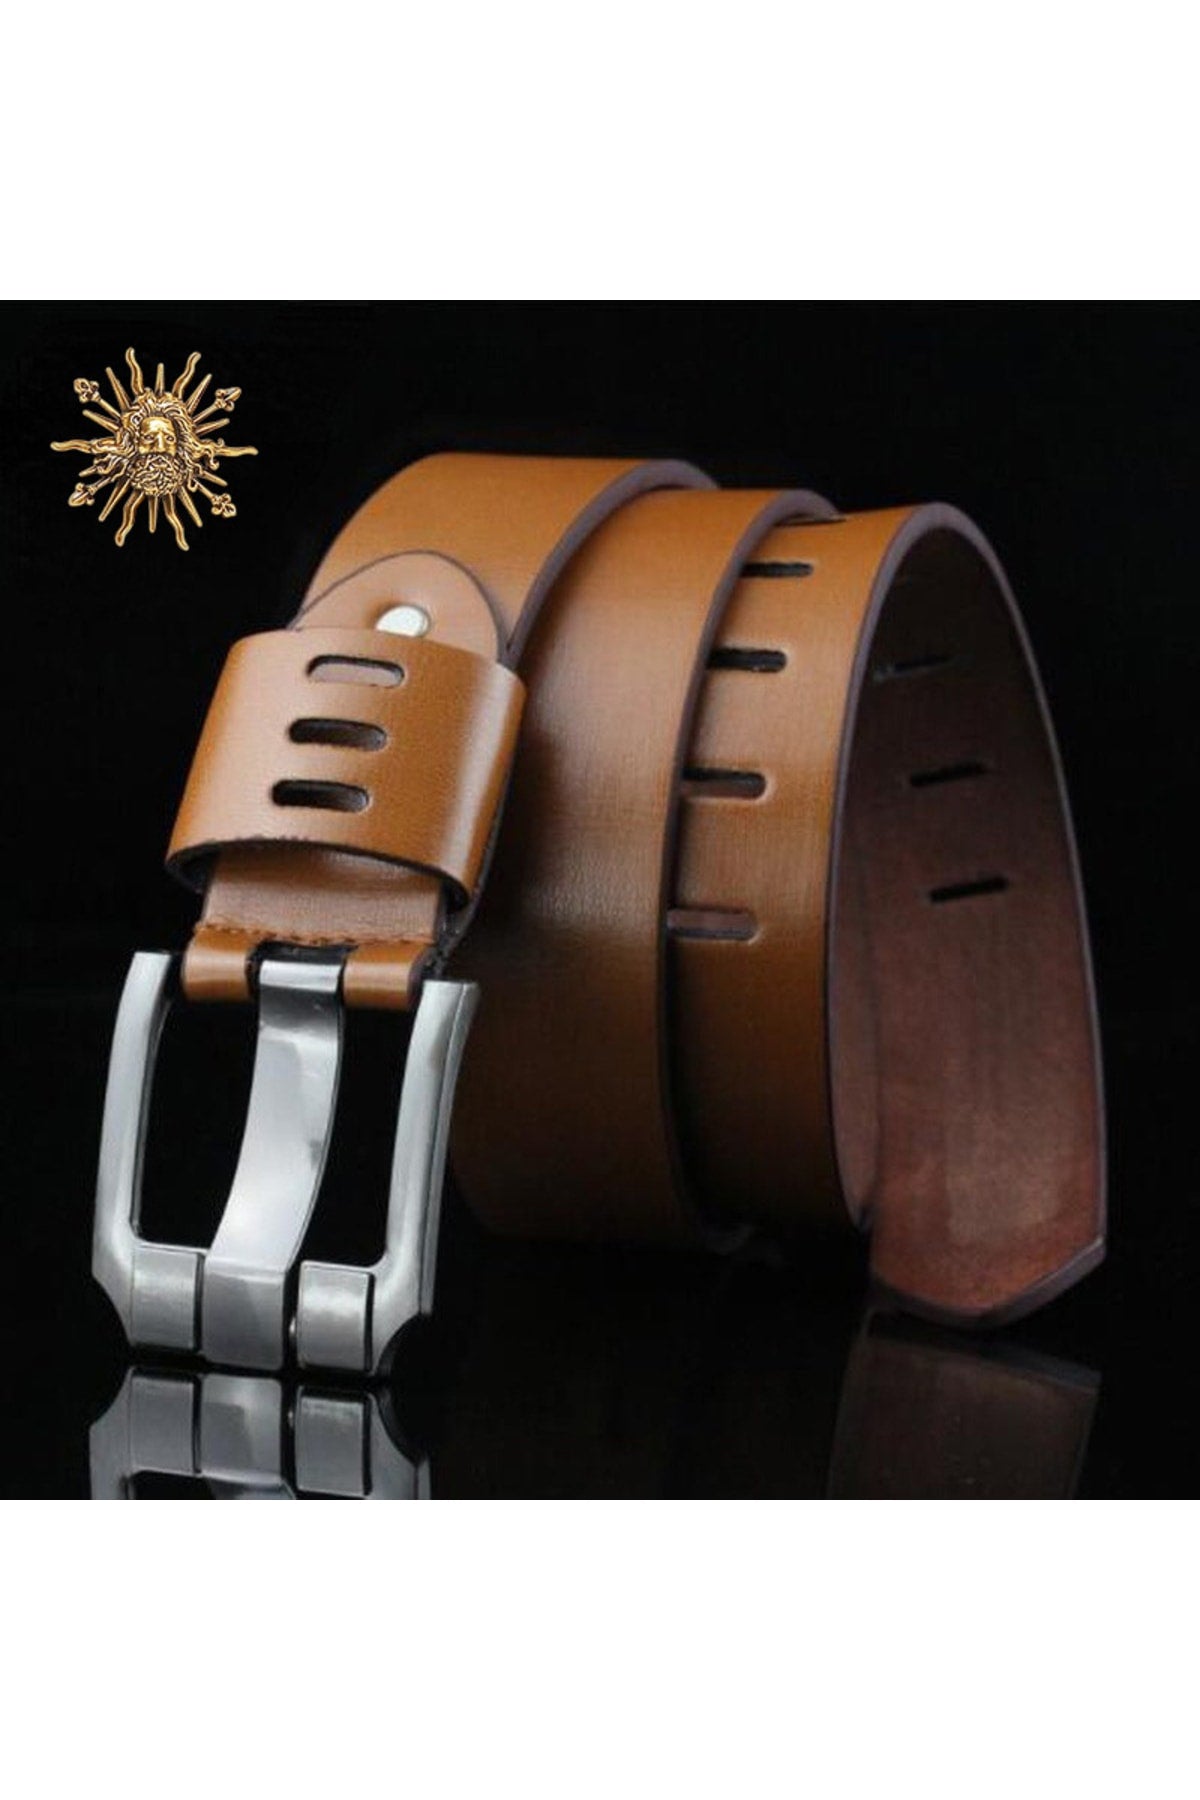 Travolta Design Taba Made in Italy Lord Concept Genuine Leather Men's Belt